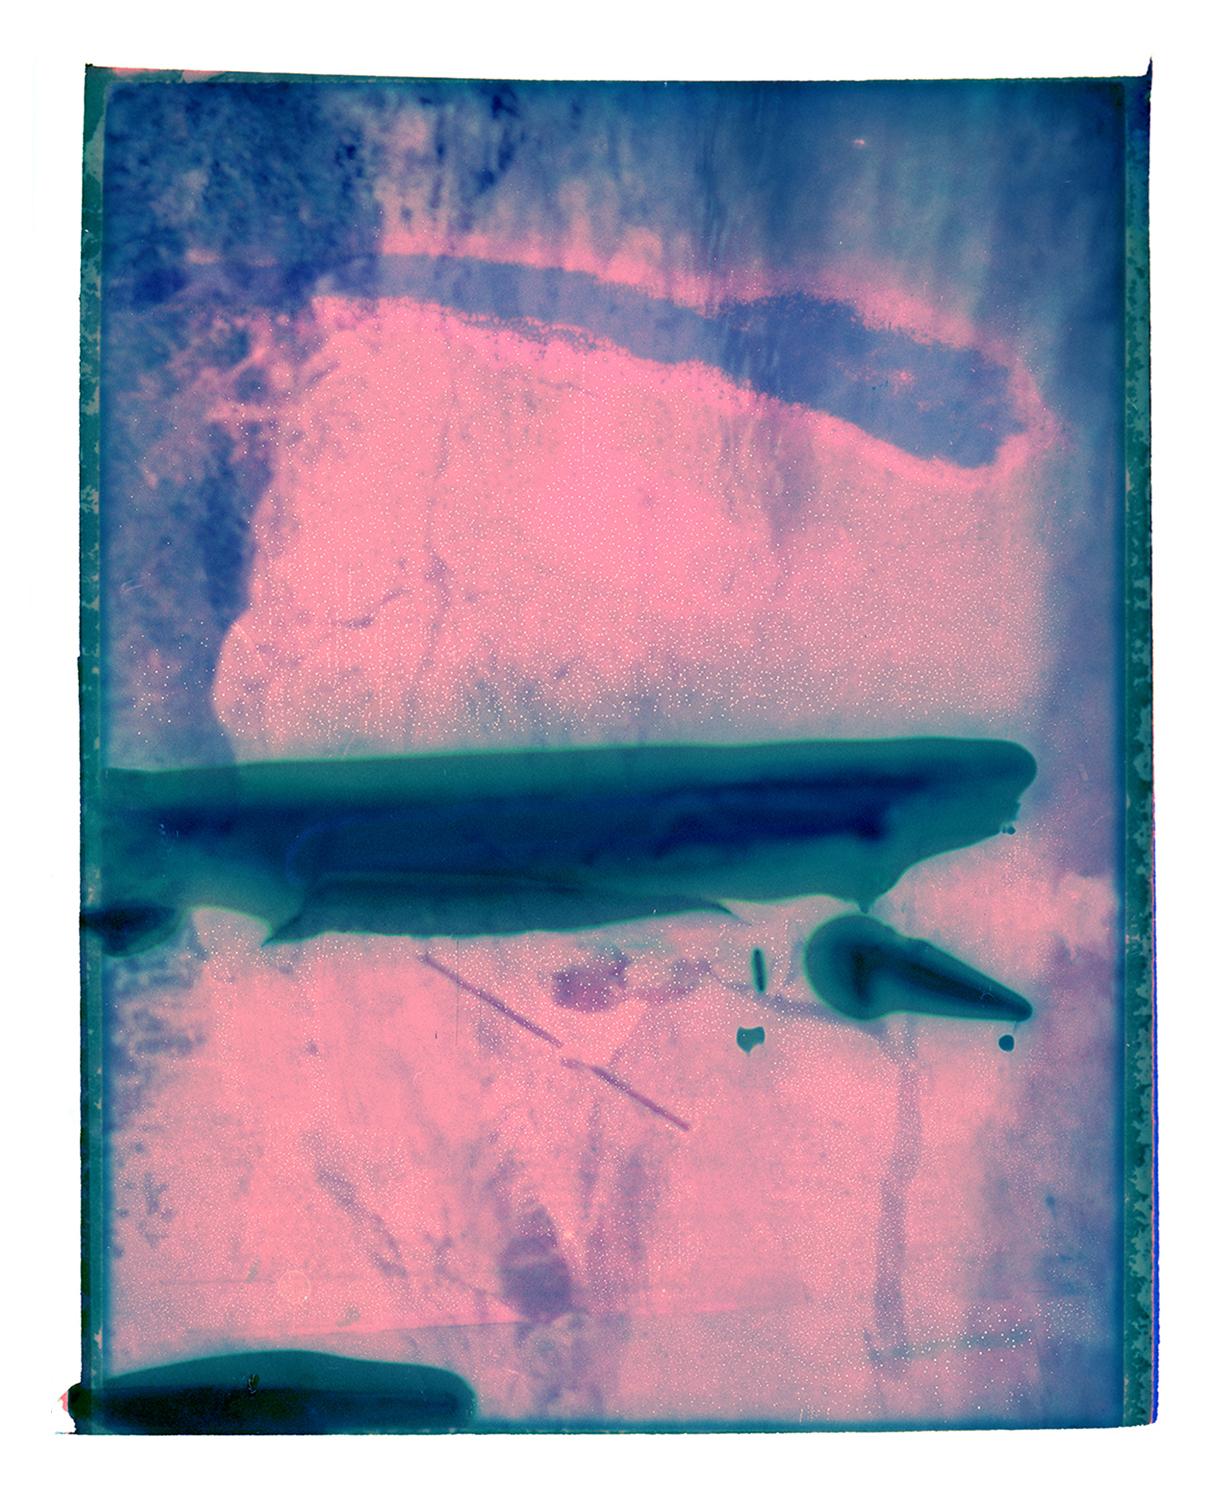 Cristina Fontsare Figurative Photograph - Groundwater II  - Contemporary, Polaroid, Photograph, Childhood, abstract